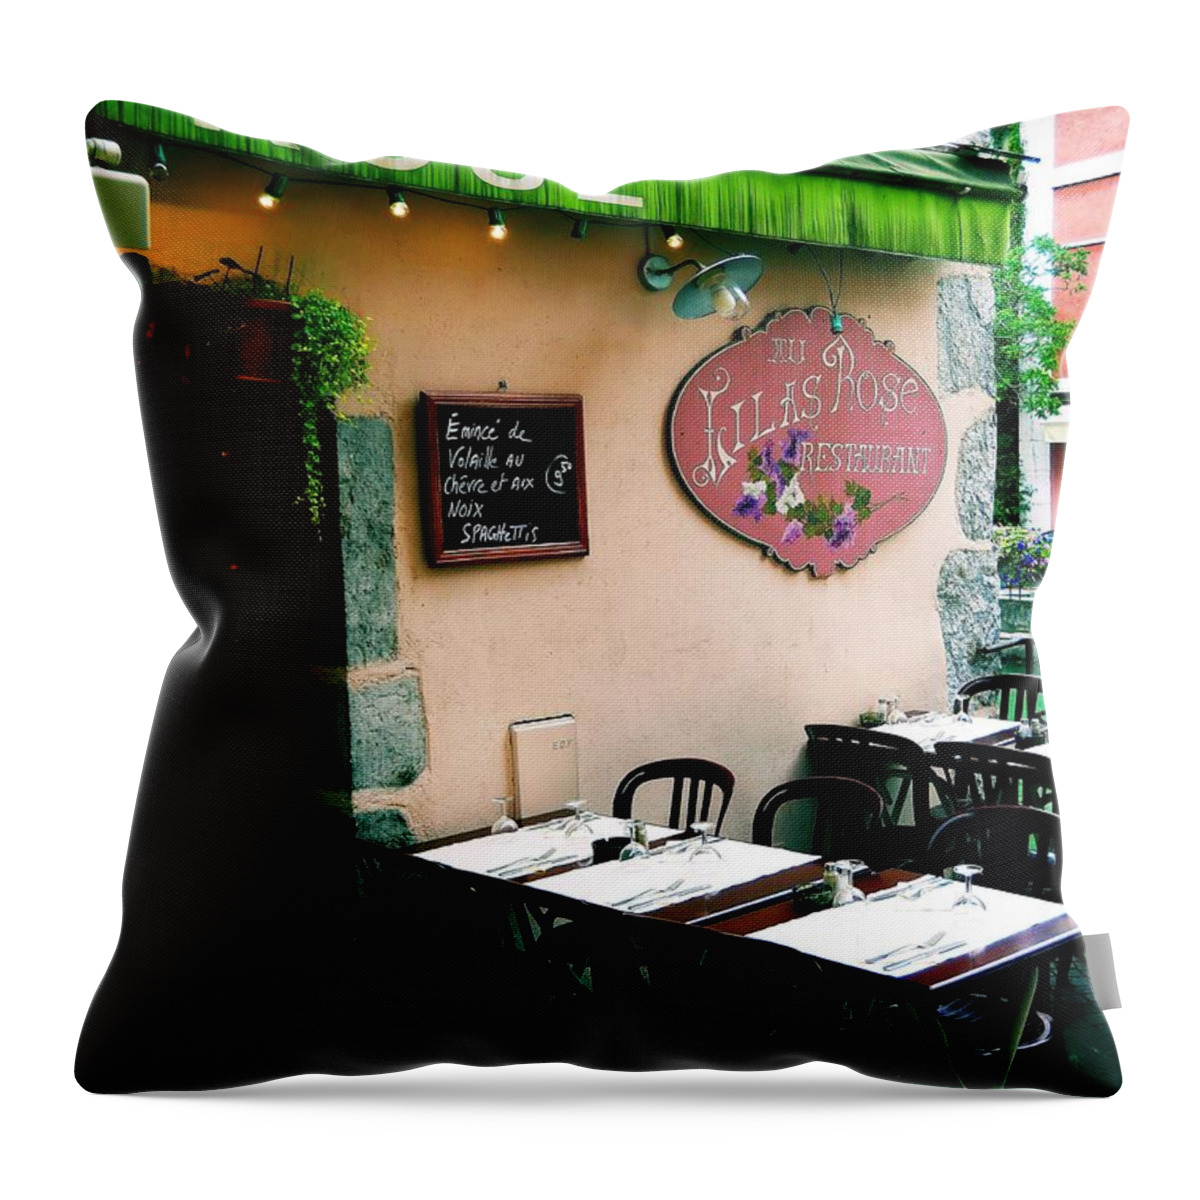 Eatery Throw Pillow featuring the photograph Eatery 1 by Maria Huntley